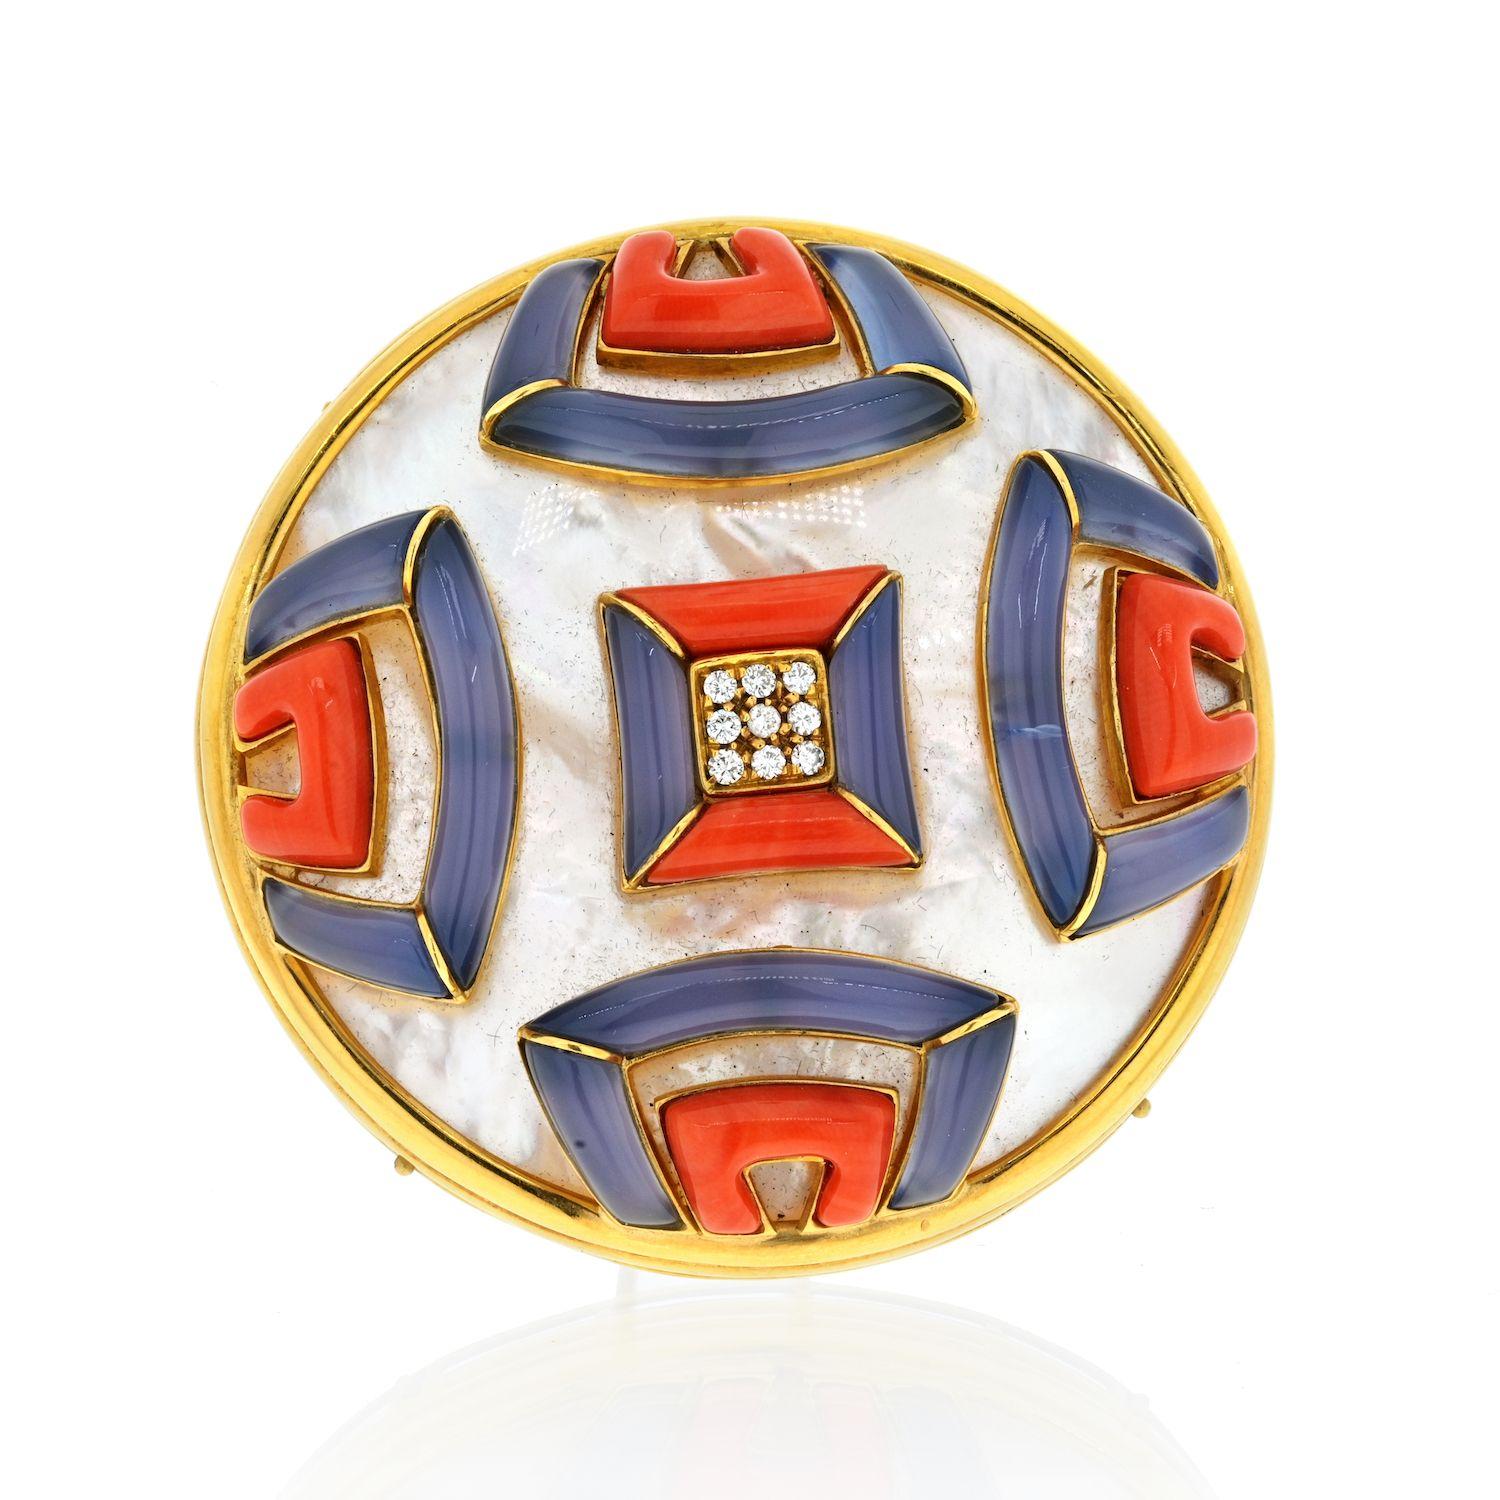 18K Yellow Gold Mother Of Pearl, Chalcedony And Coral Round Brooch. Lovely brooch of a nice substantial weight. 56mm wide.